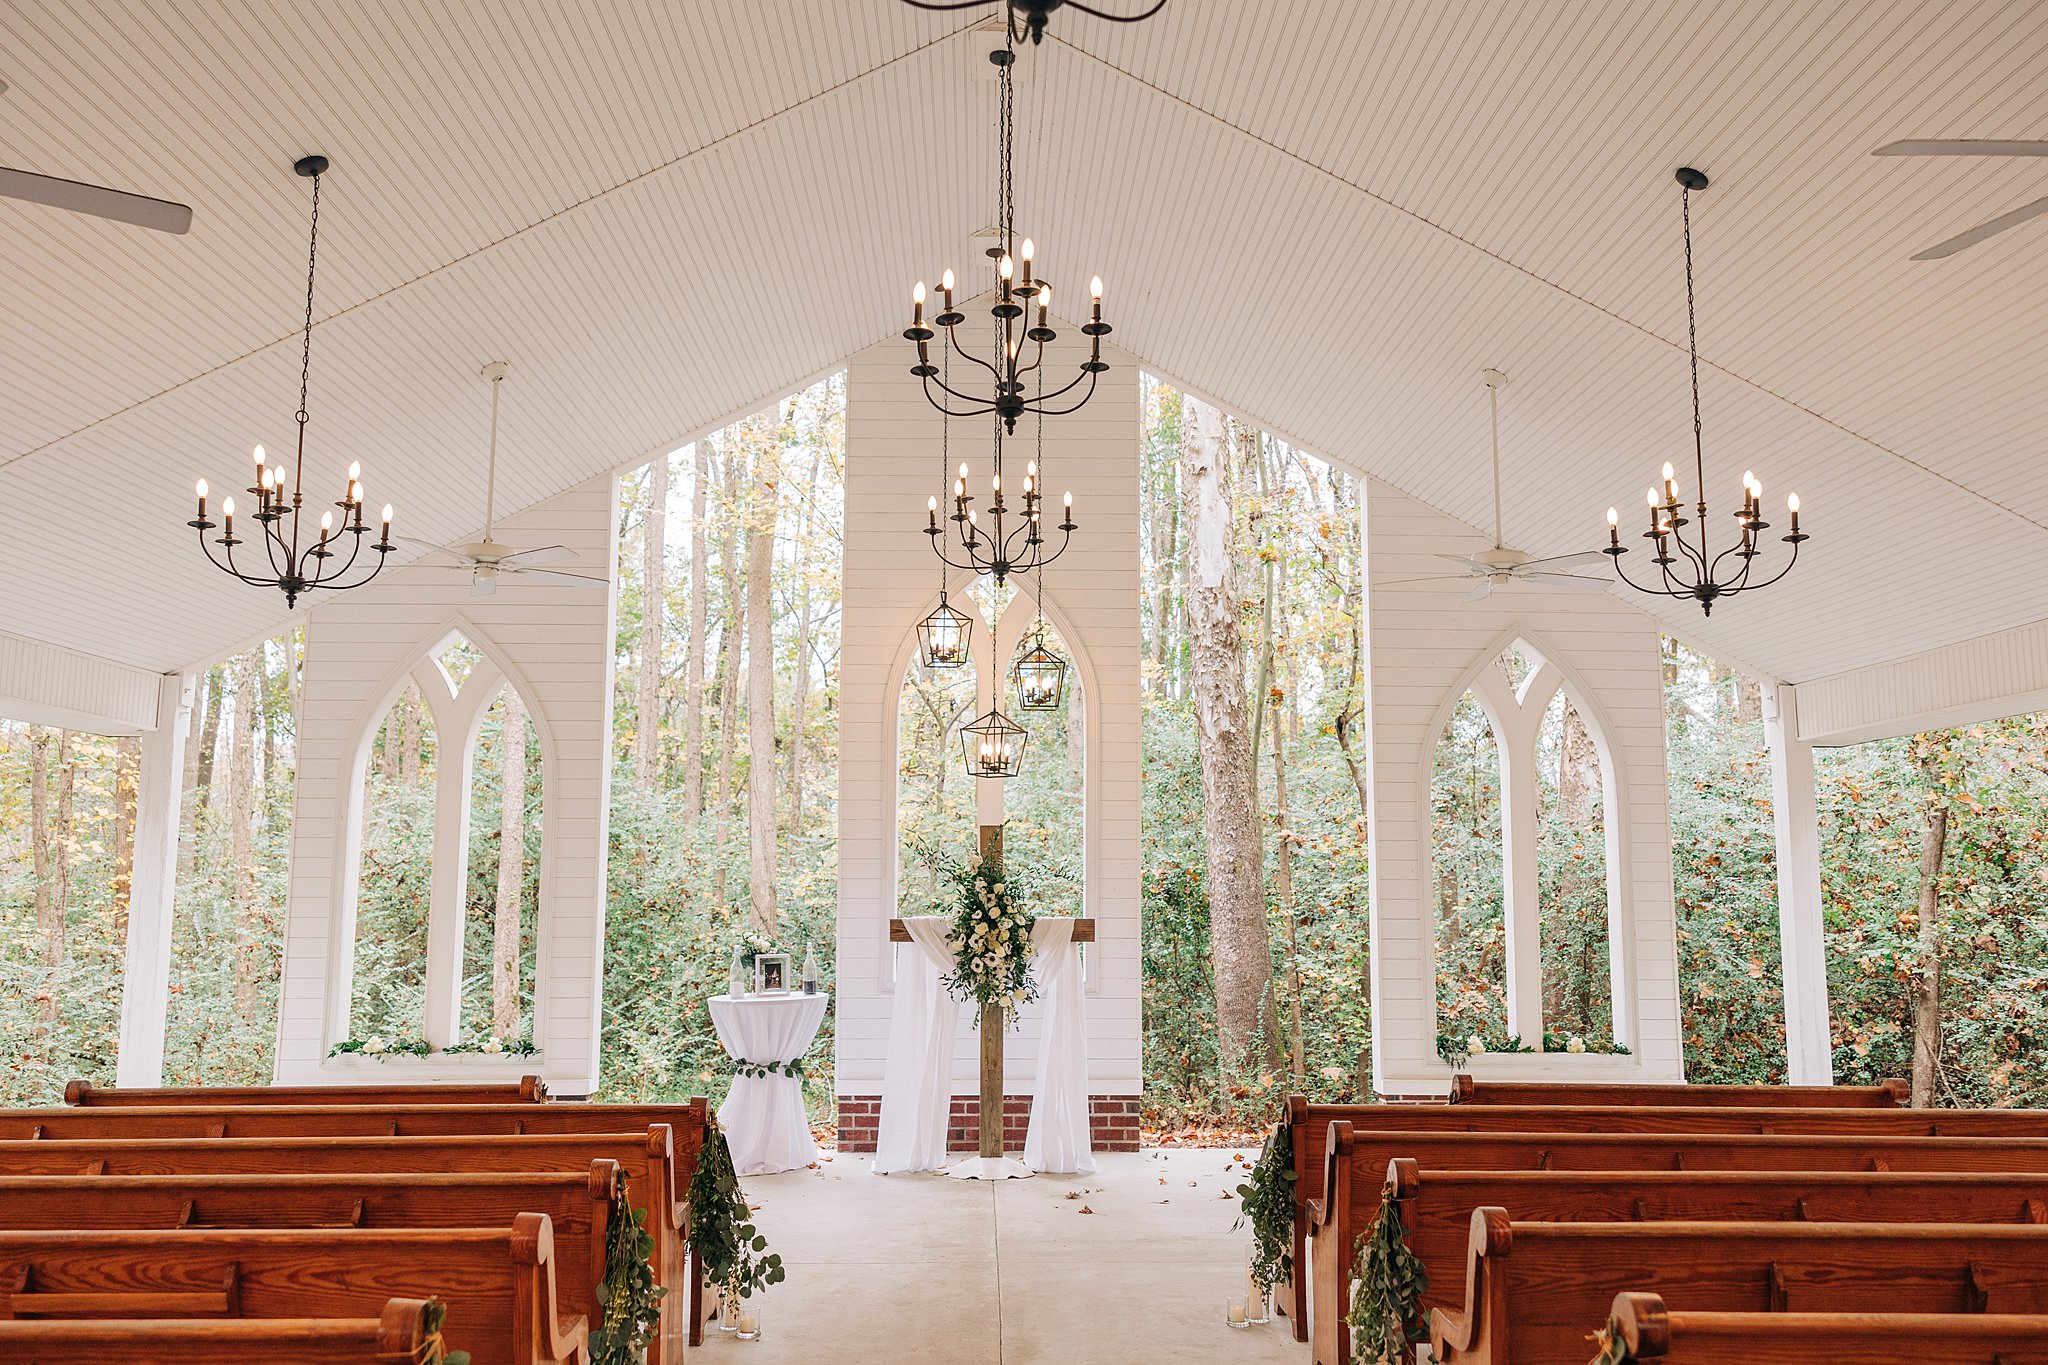 A view inside the open air cornealius properties wedding chapel set up for a ceremony with a wooden cross